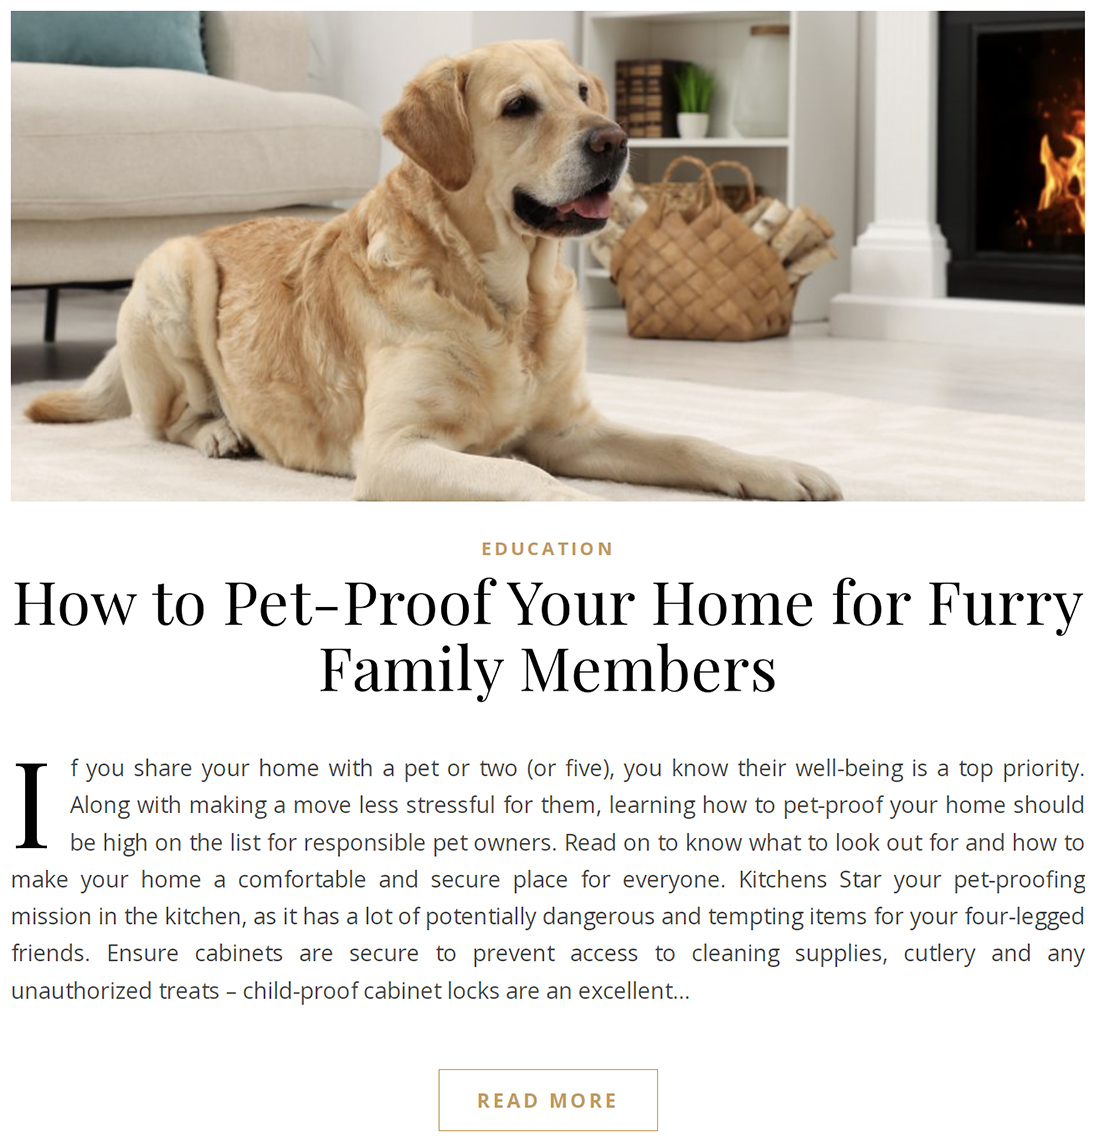 How to Pet-Proof Your Home